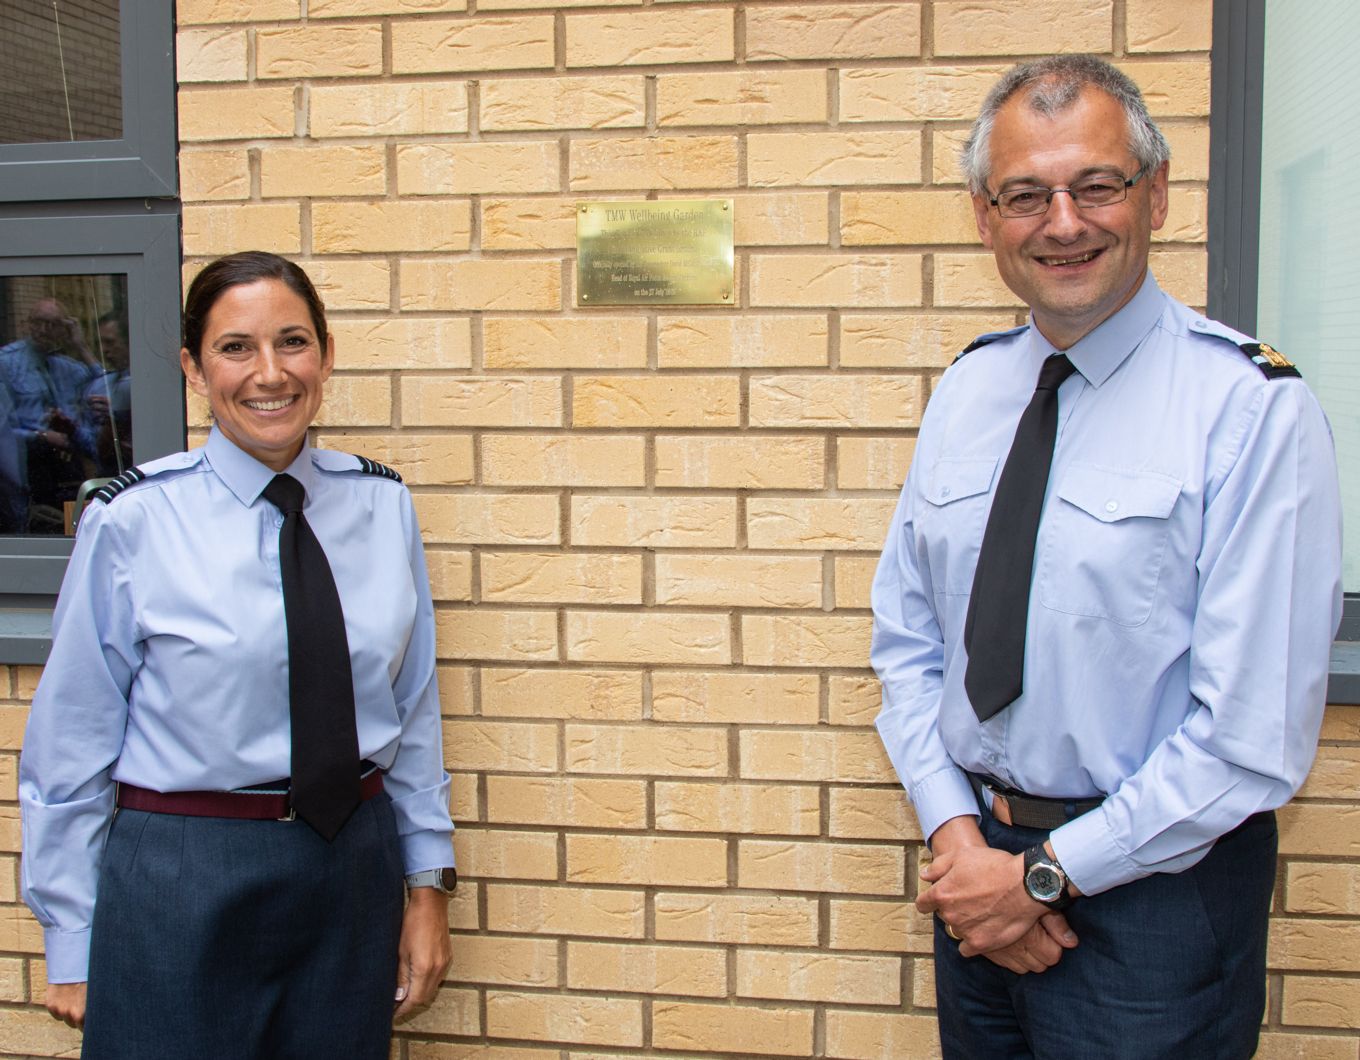 Pictured, Air Officer Medical and Head of the RAF Medical Service, Air Commodore Dave McLoughlin and Officer Commanding Tactical Medical Wing, Wing Commander Jo Bland in the garden with the commemorate plaque